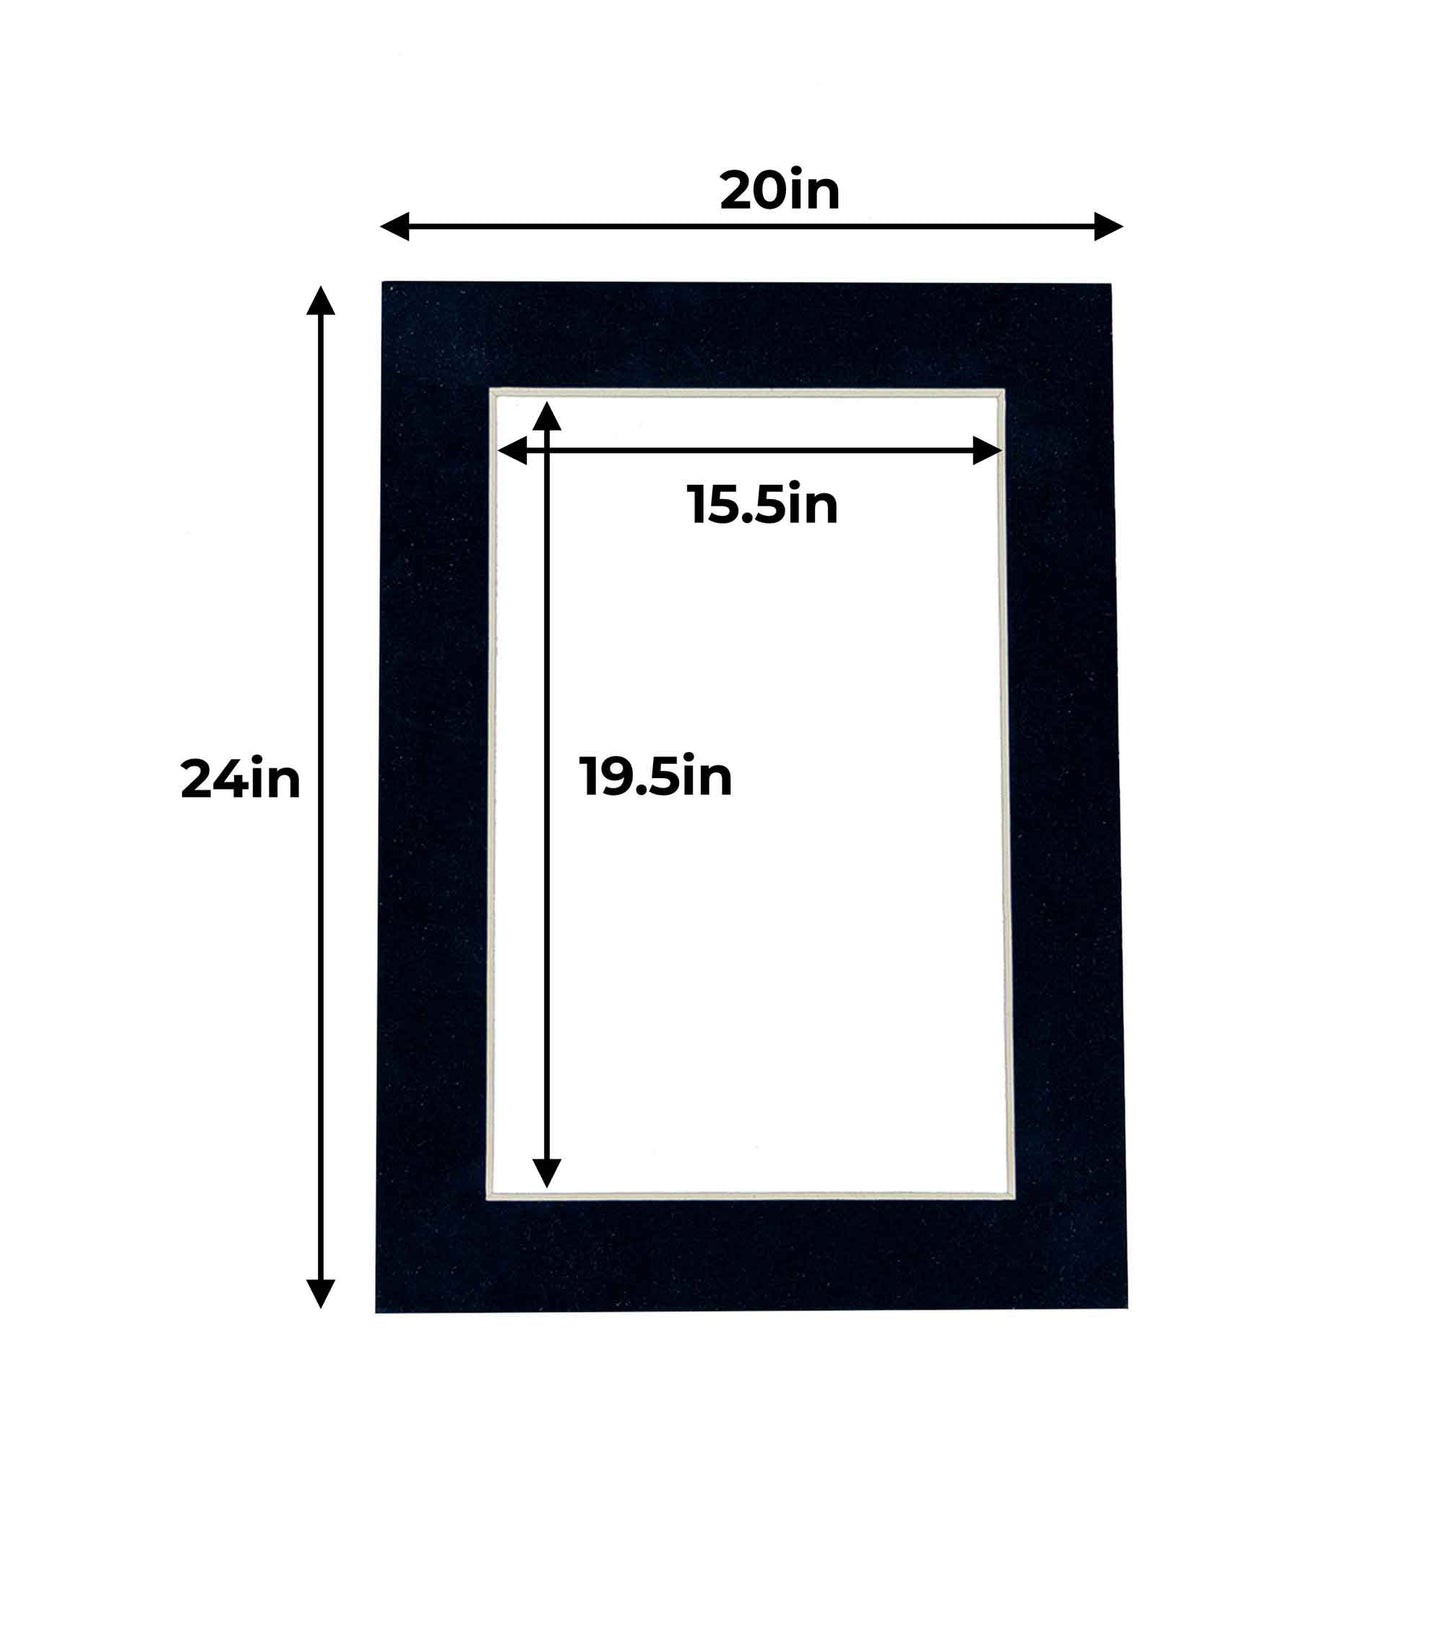 Pack of 25 Navy Blue Suede Precut Acid-Free Matboard Set with Clear Bags & Backings